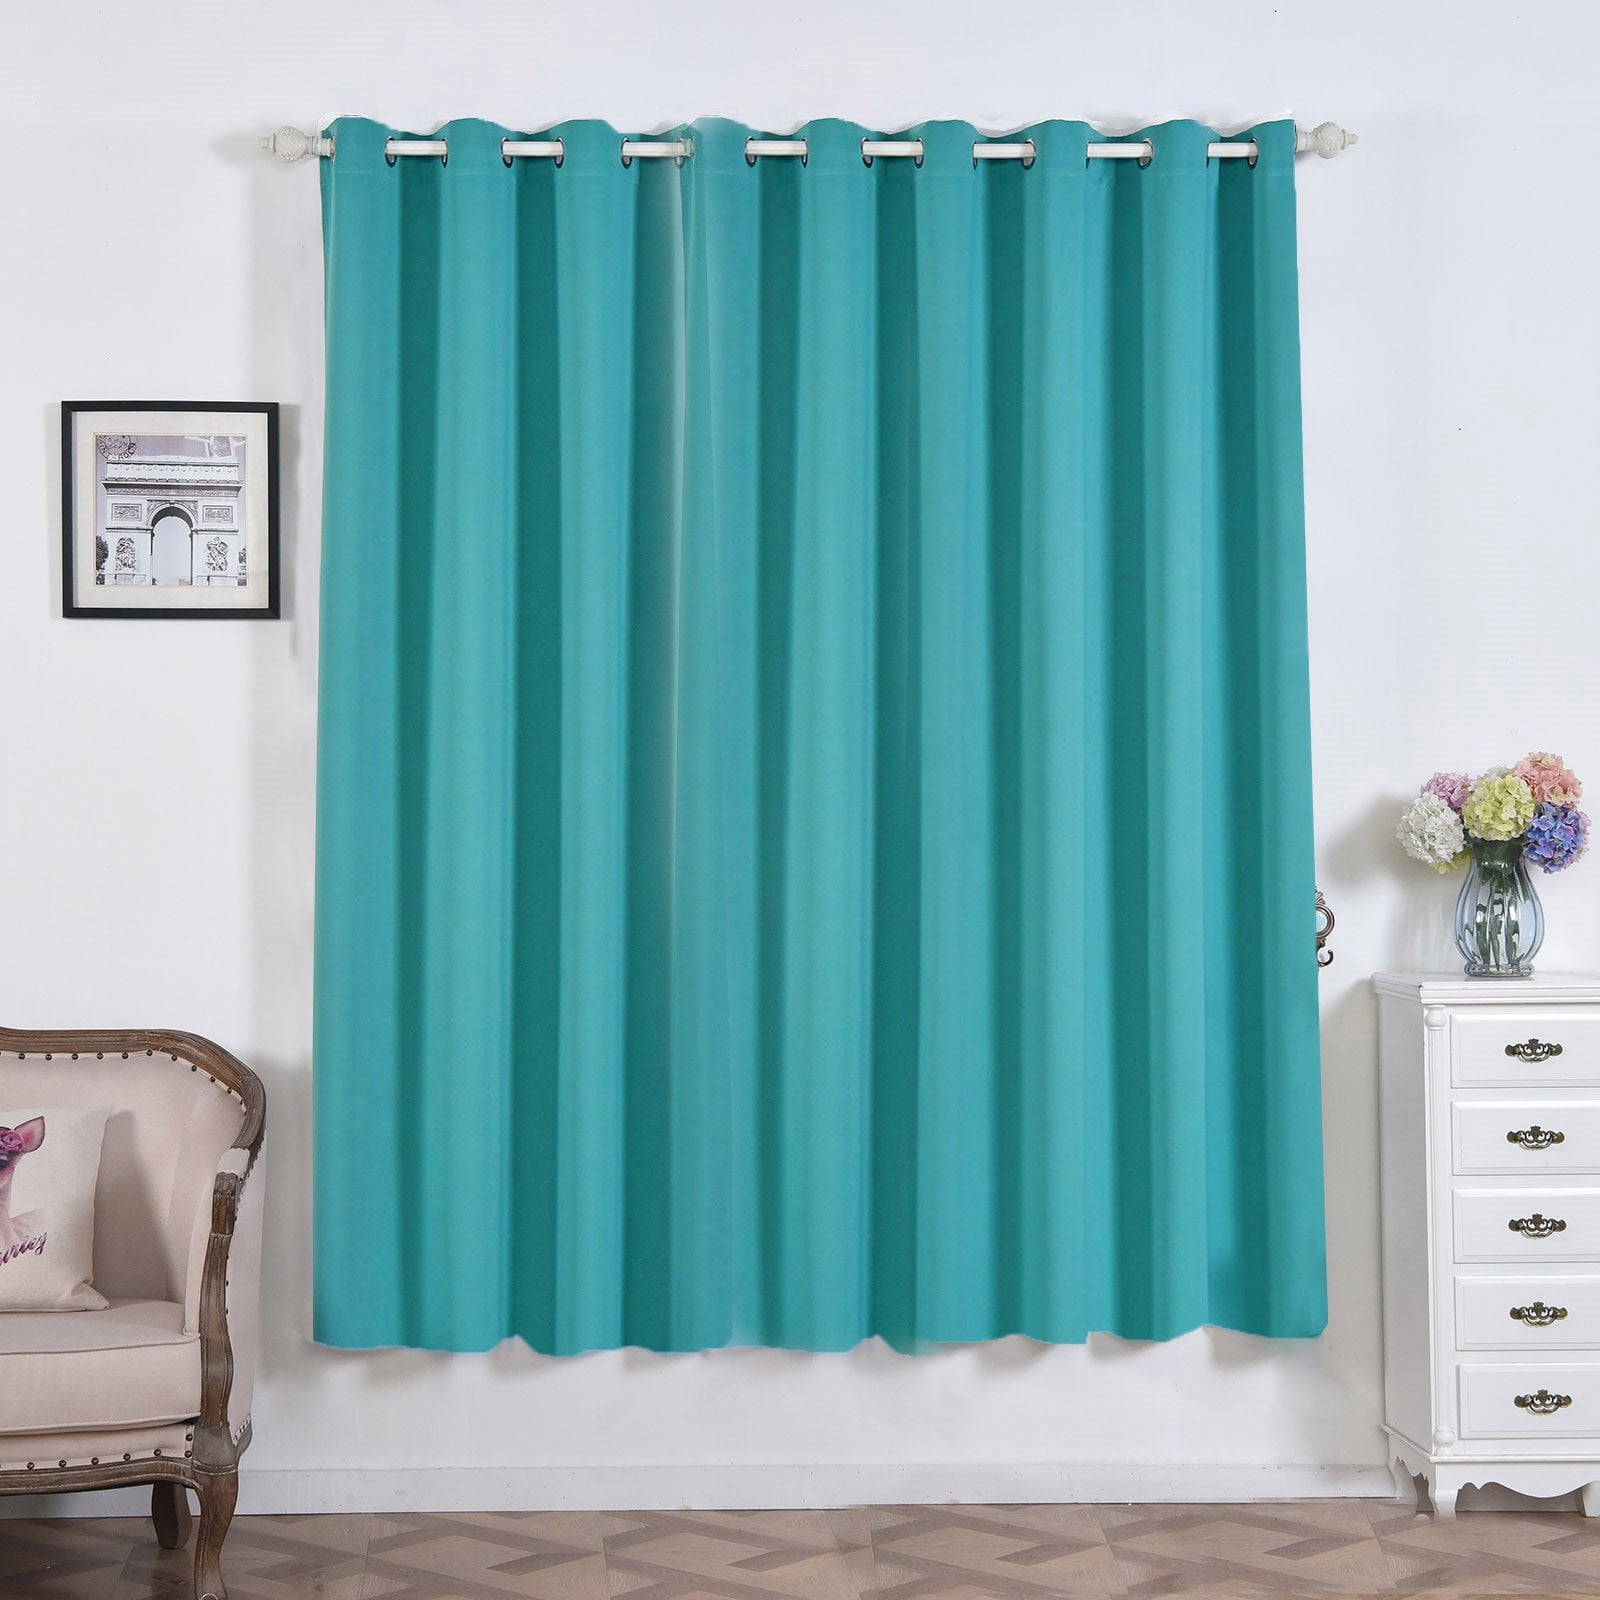 Turquoise Blackout Curtains | 2 Packs | 52 x 84 Inch Grommet Curtains ...